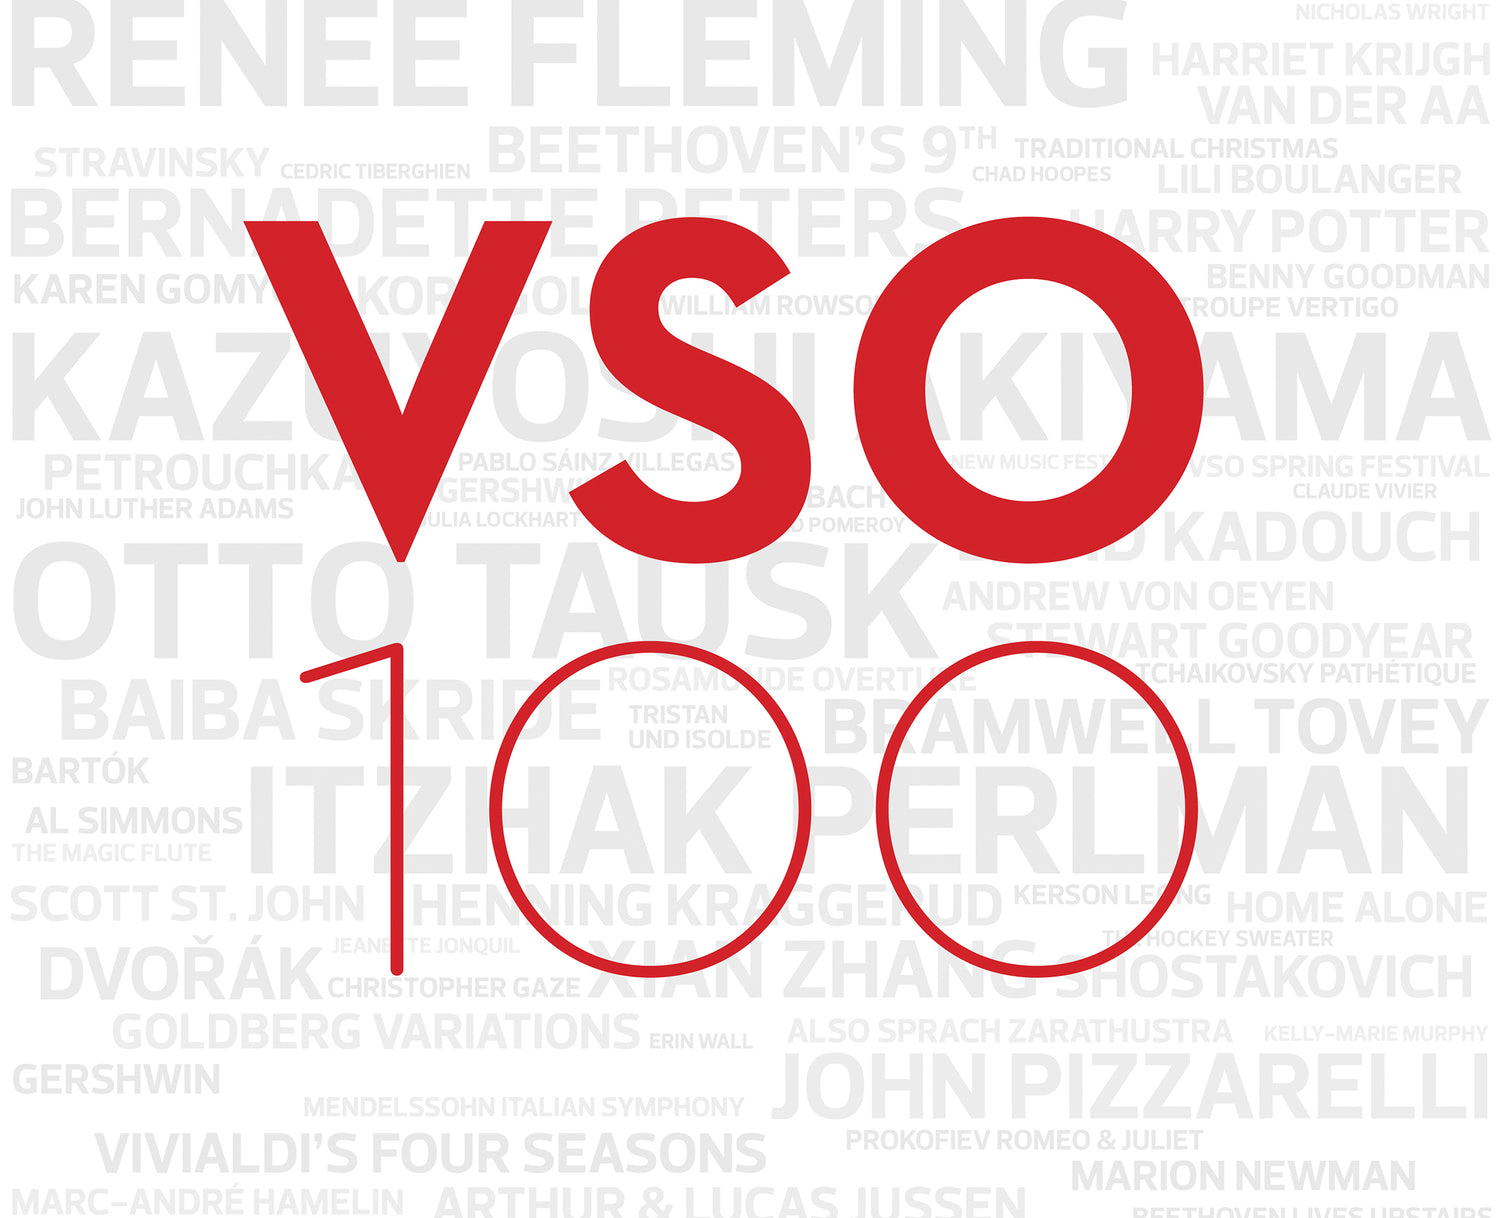 bay6 creative design of Vancouver Symphony Orchestra's 100th anniversary brochure front cover